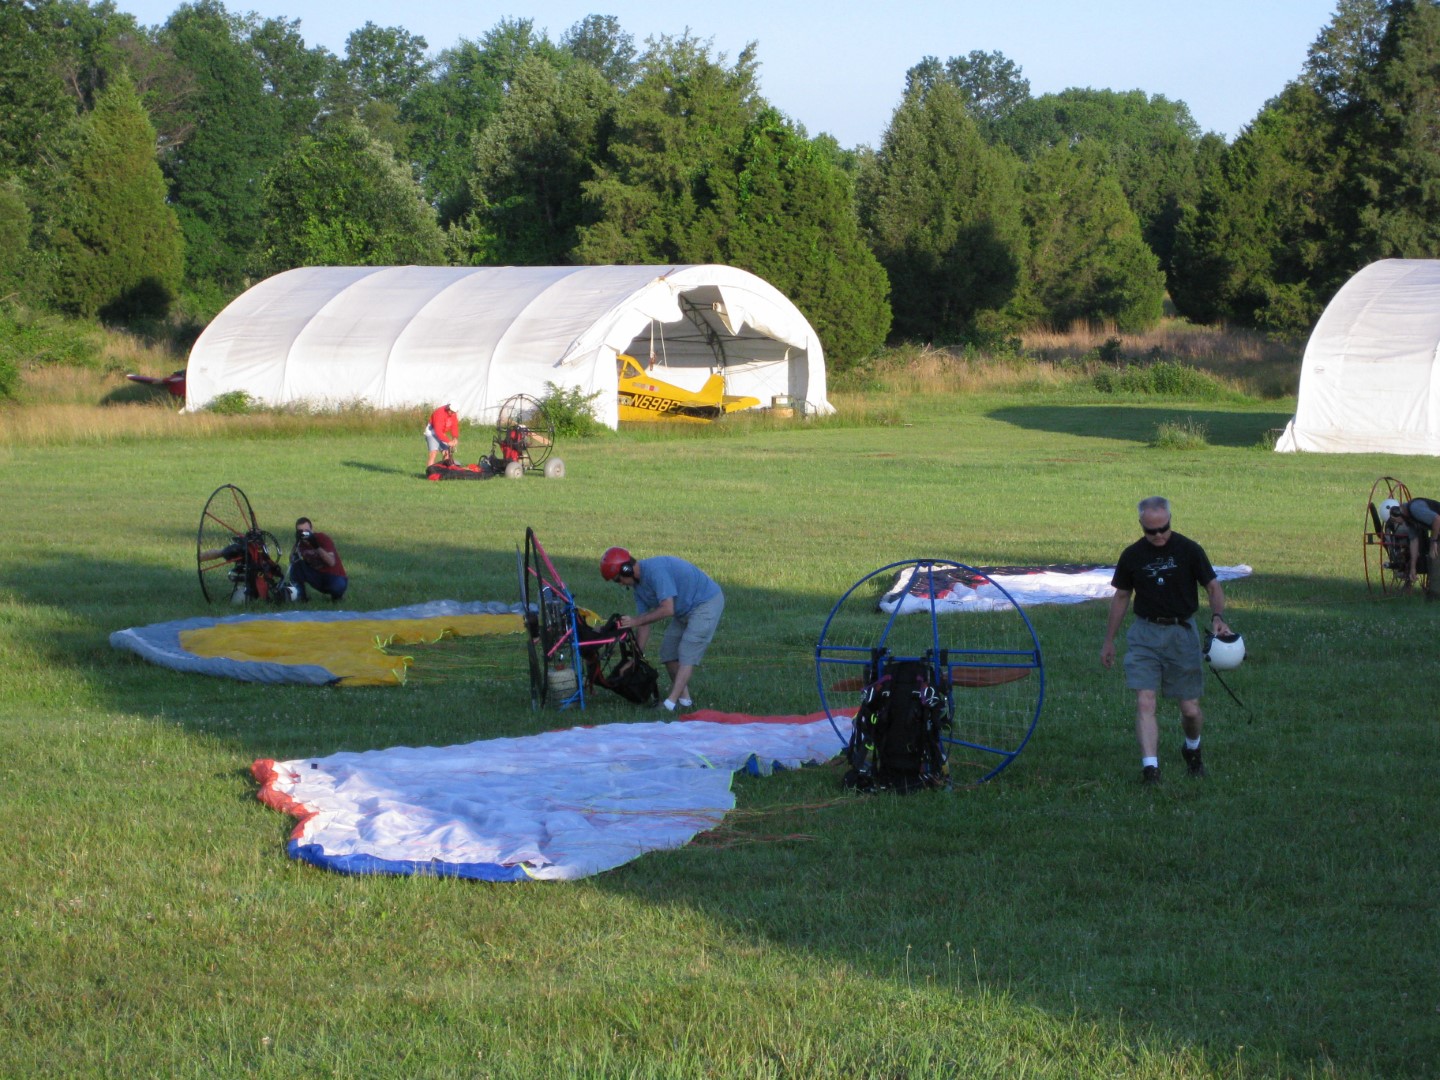 PPG pilots setting up in the morning at the Lost Griz Aerodrome